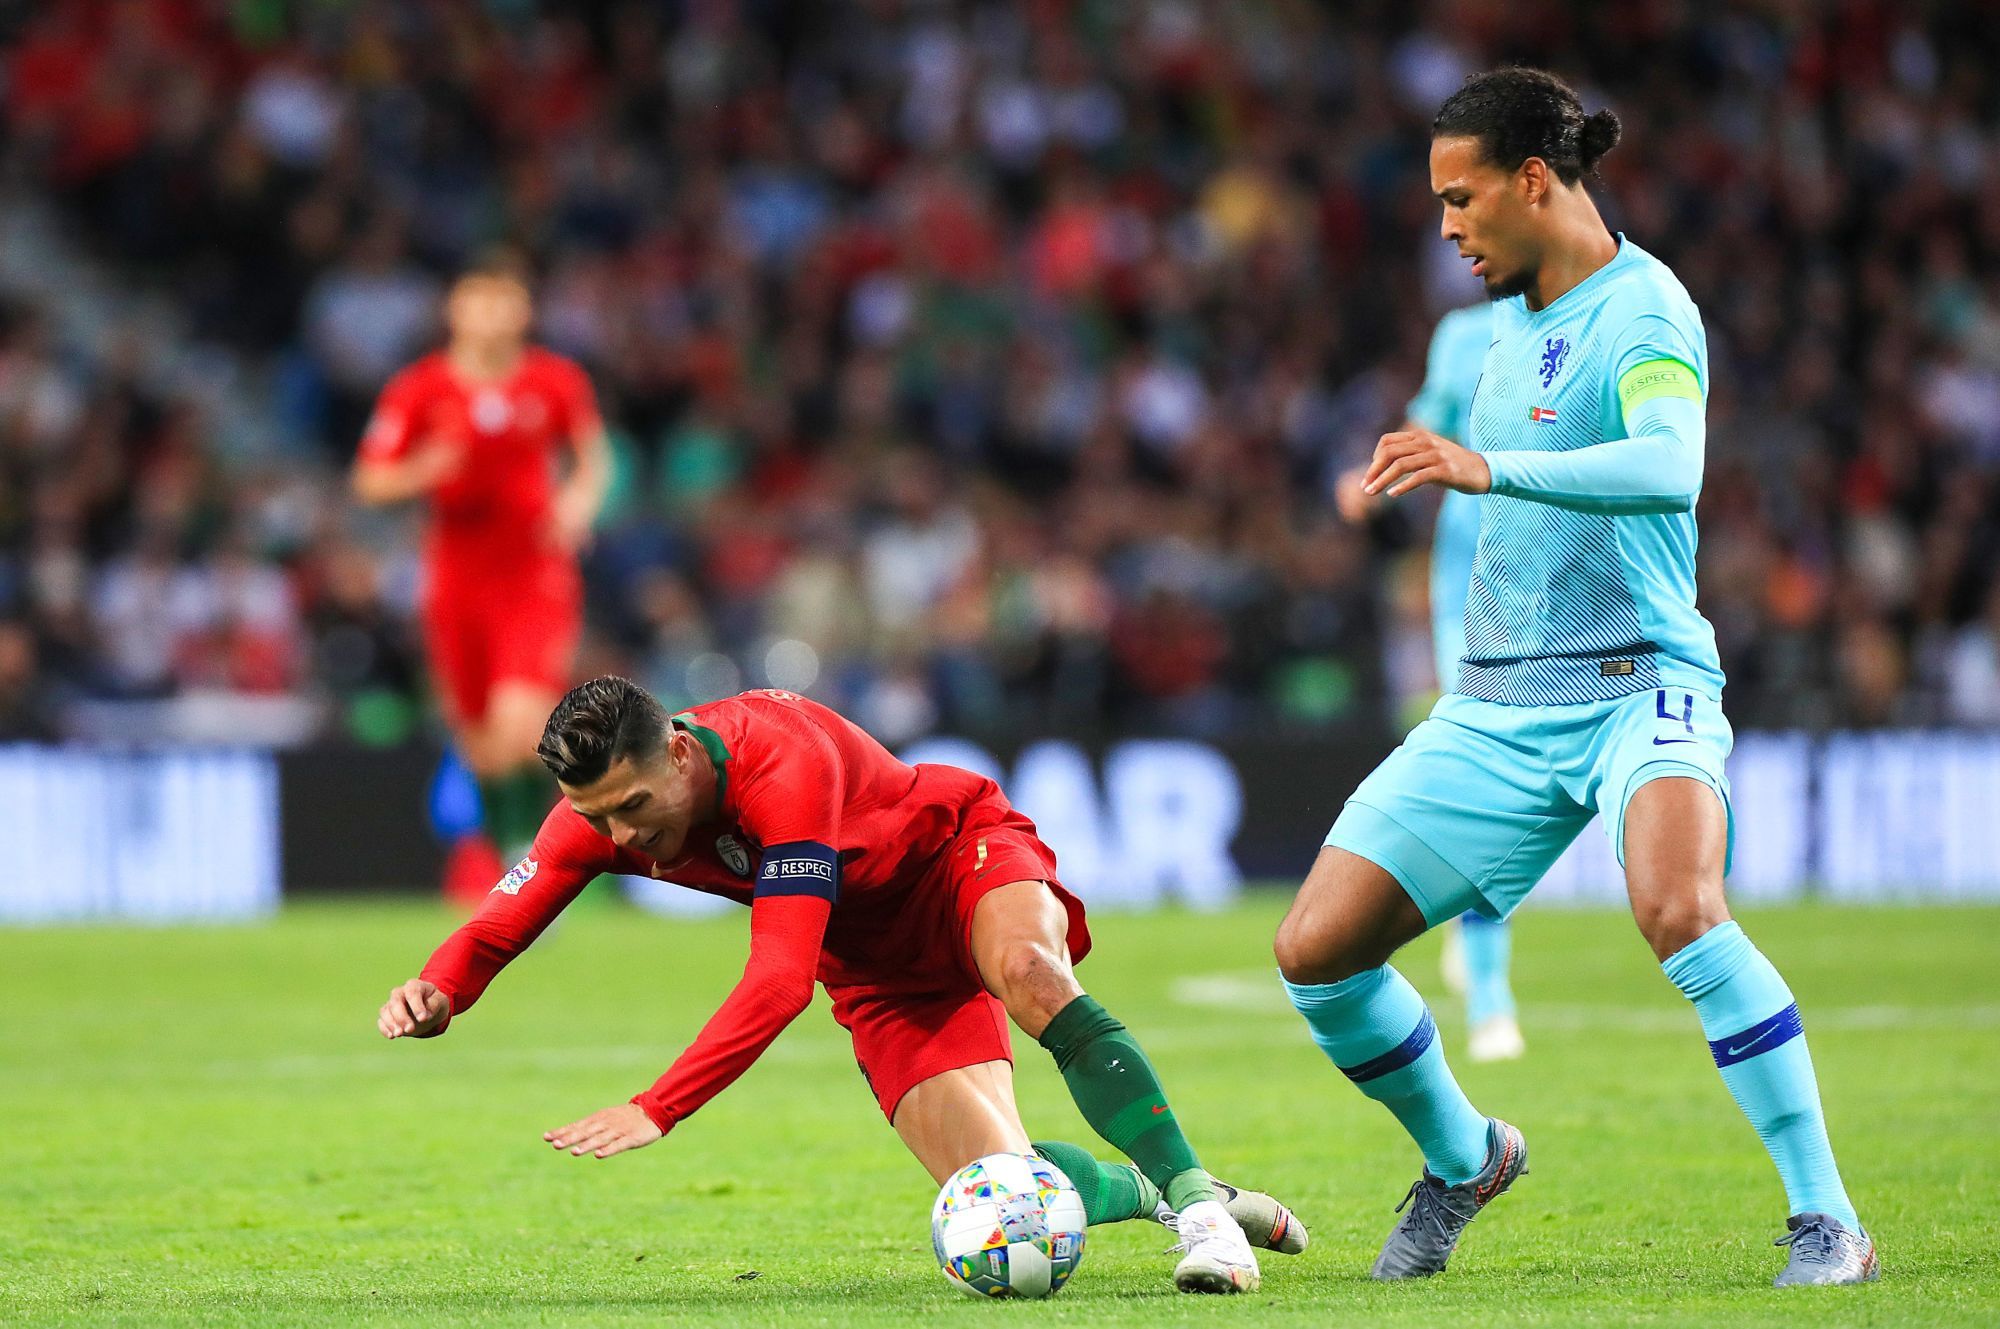 Portugal's Cristiano Ronaldo (left) and Netherlands' Virgil van Dijk in action during the Nations League Final at Estadio do Dragao, Porto. On June 9th, 2019. Photo : PA Images / Icon Sport